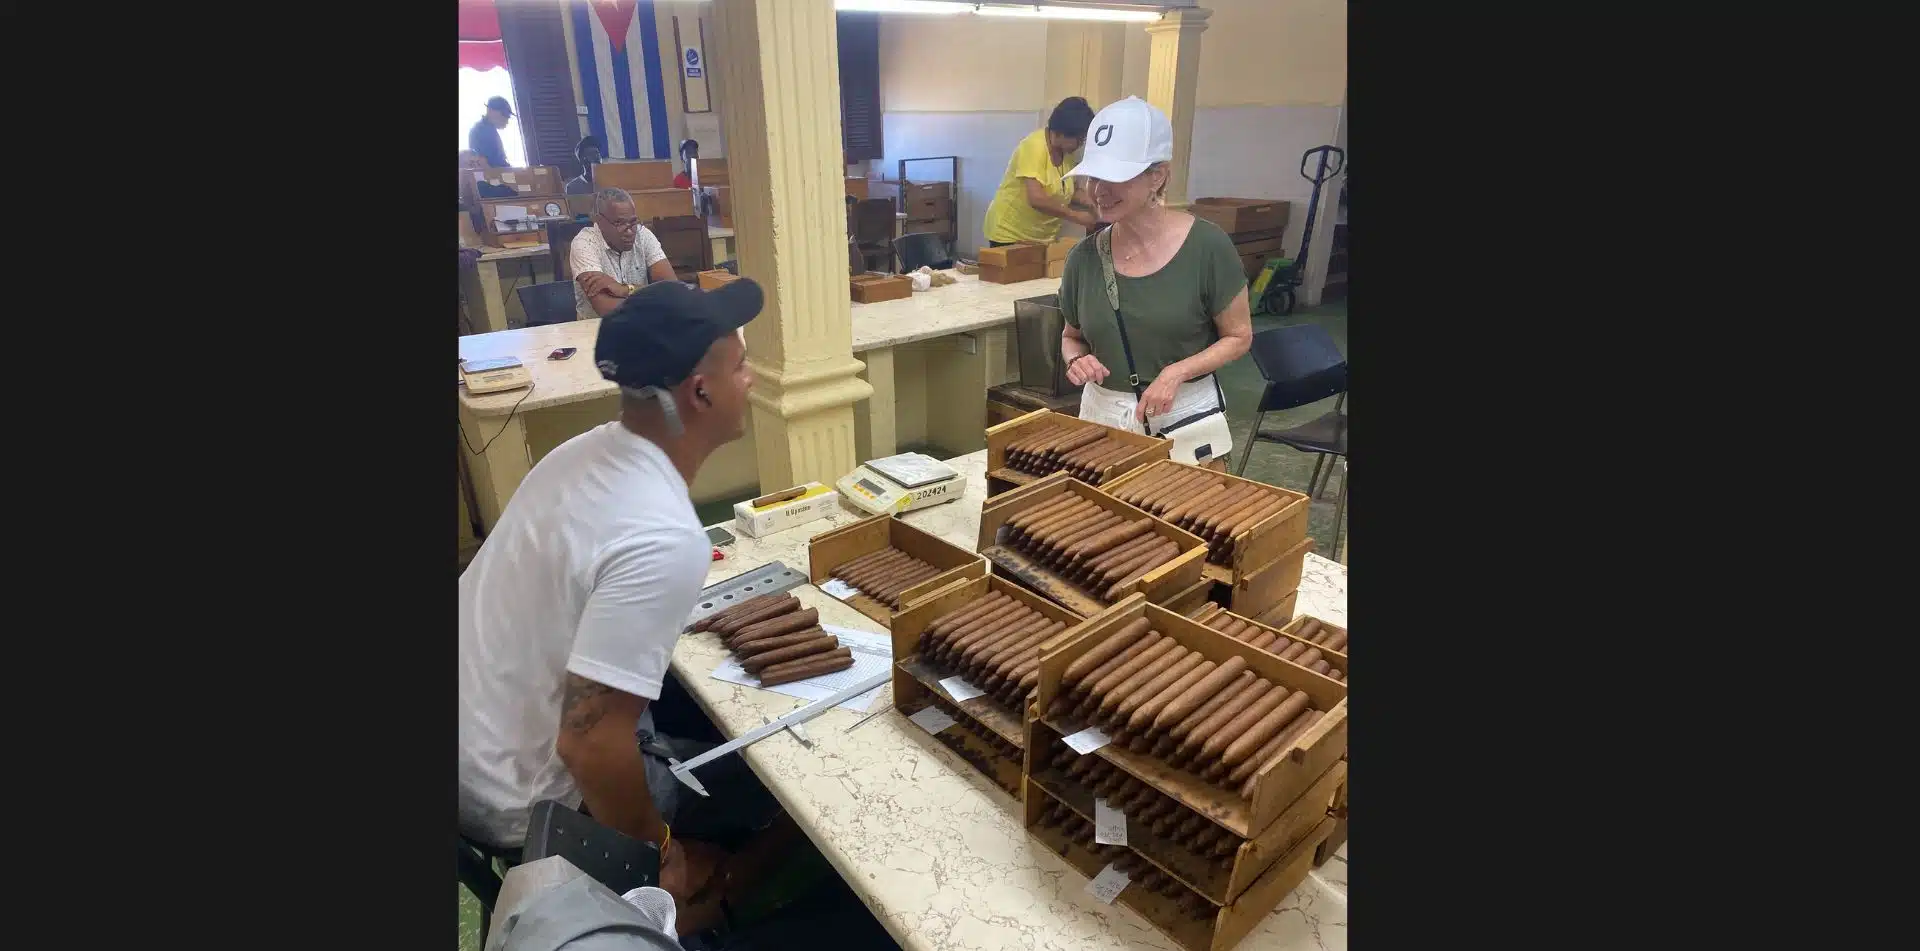 Tour a traditional cigar-making factory with an expert roller, who explains the process and its important role Cuban life